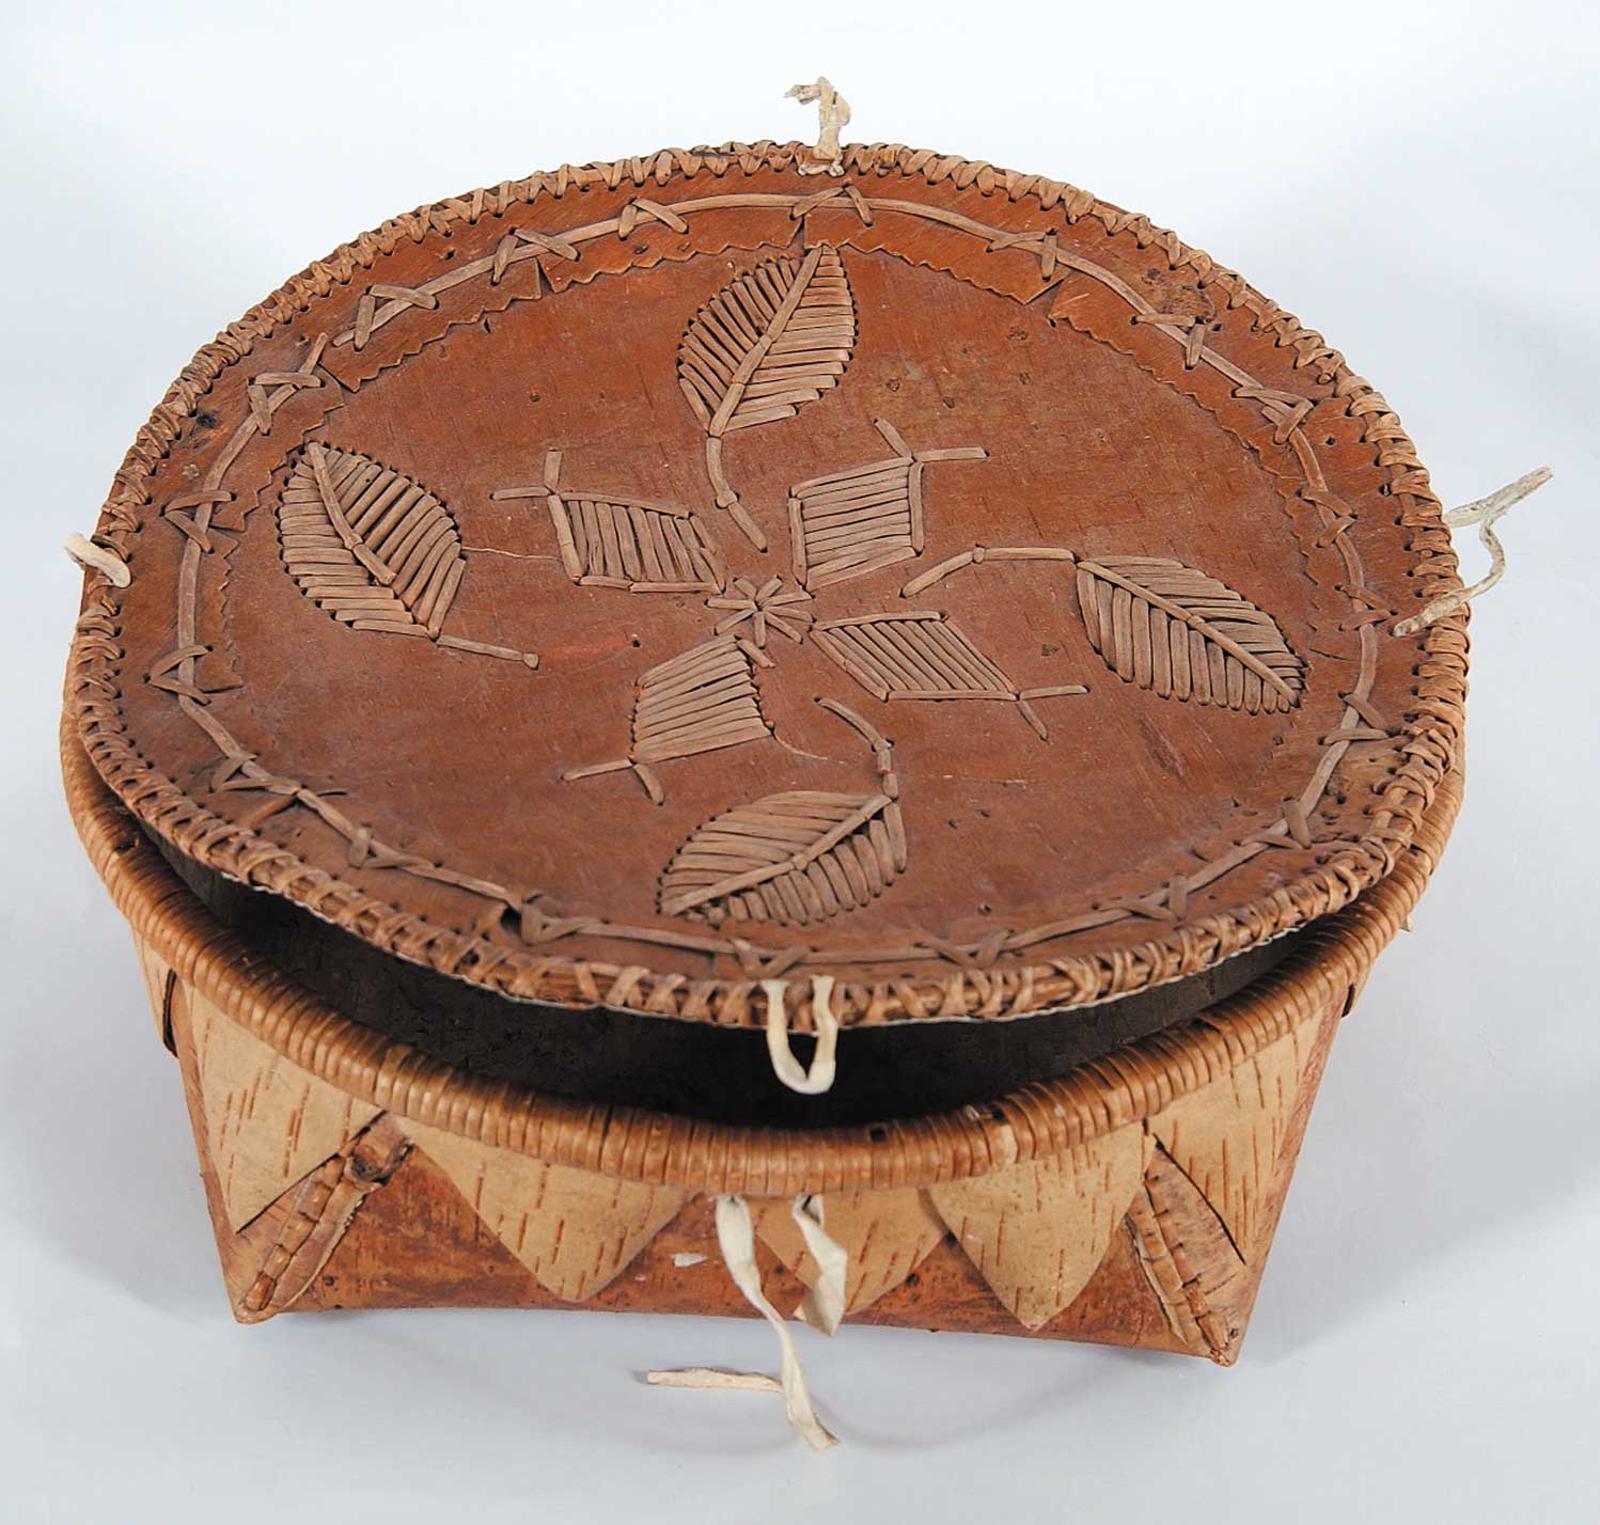 First Nations Basket School - Birch Bark Container with Floral Patterned Lid